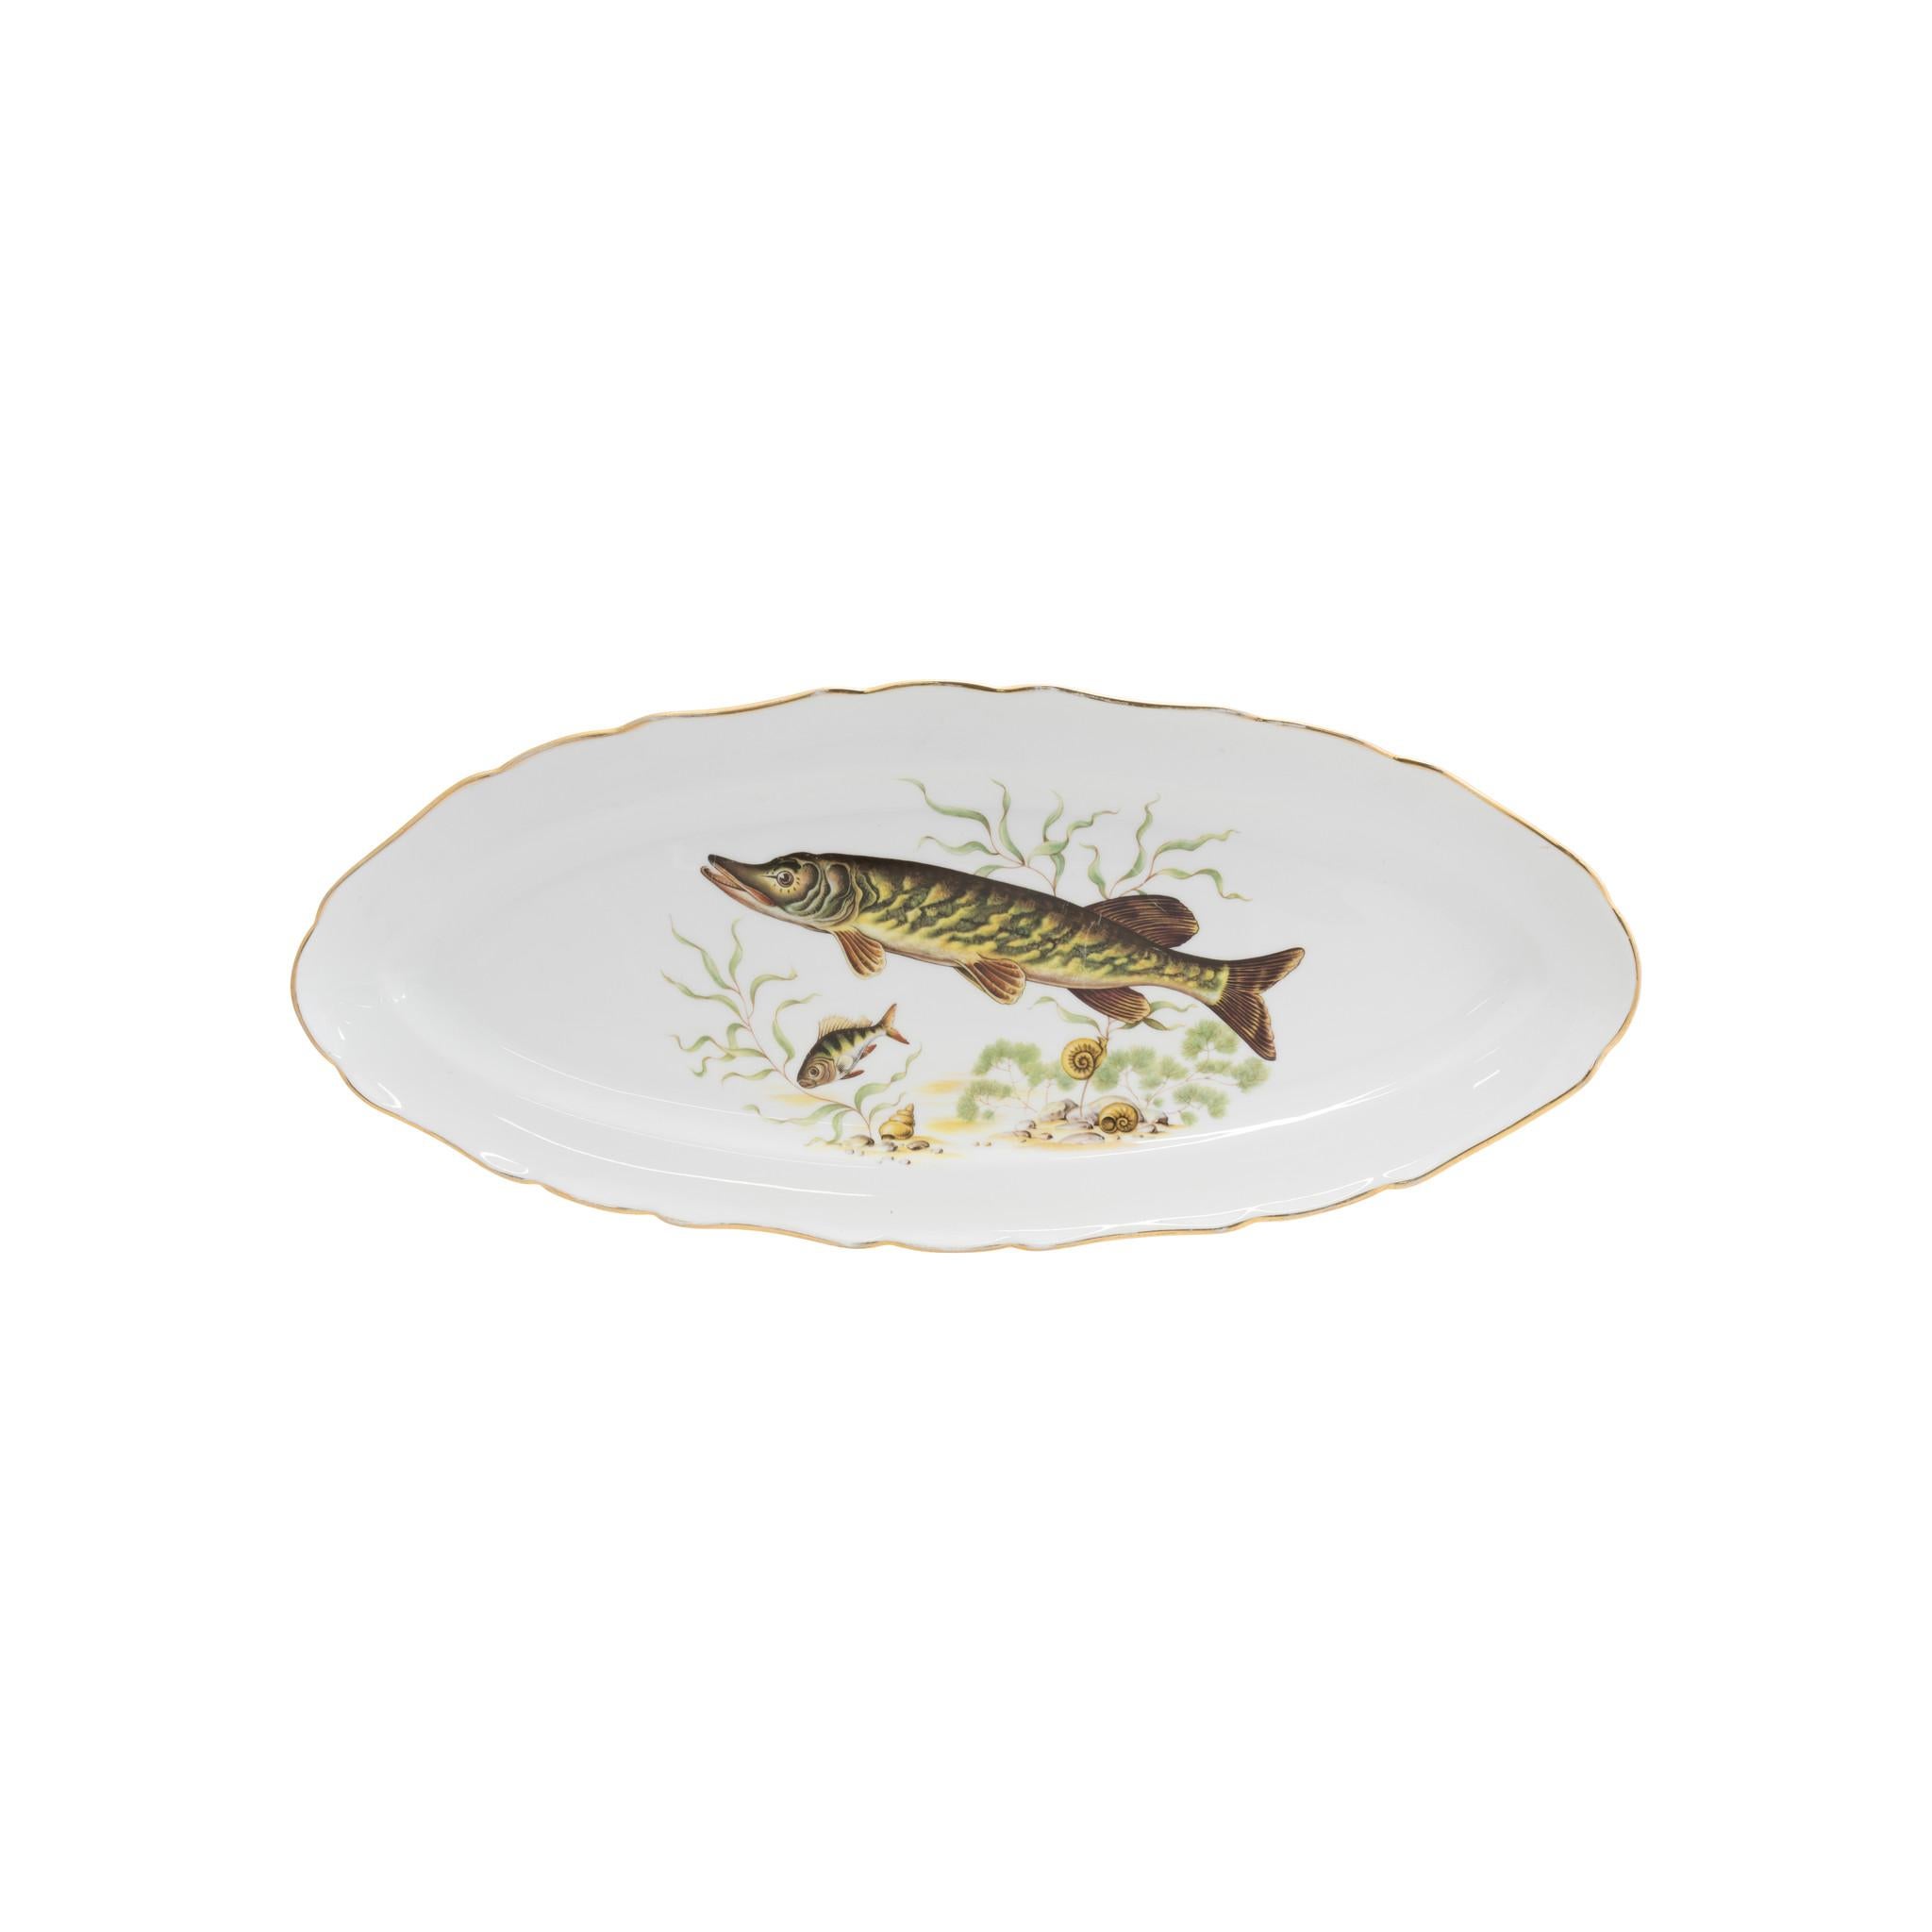 Set of 13 French porcelain fish service, M&S, including one serving platter, and 12 plates (one with a small chip at rim). Each plate featuring a different fish, all with slightly scalloped gold trimmed rim. Lovely set that would complement a rustic